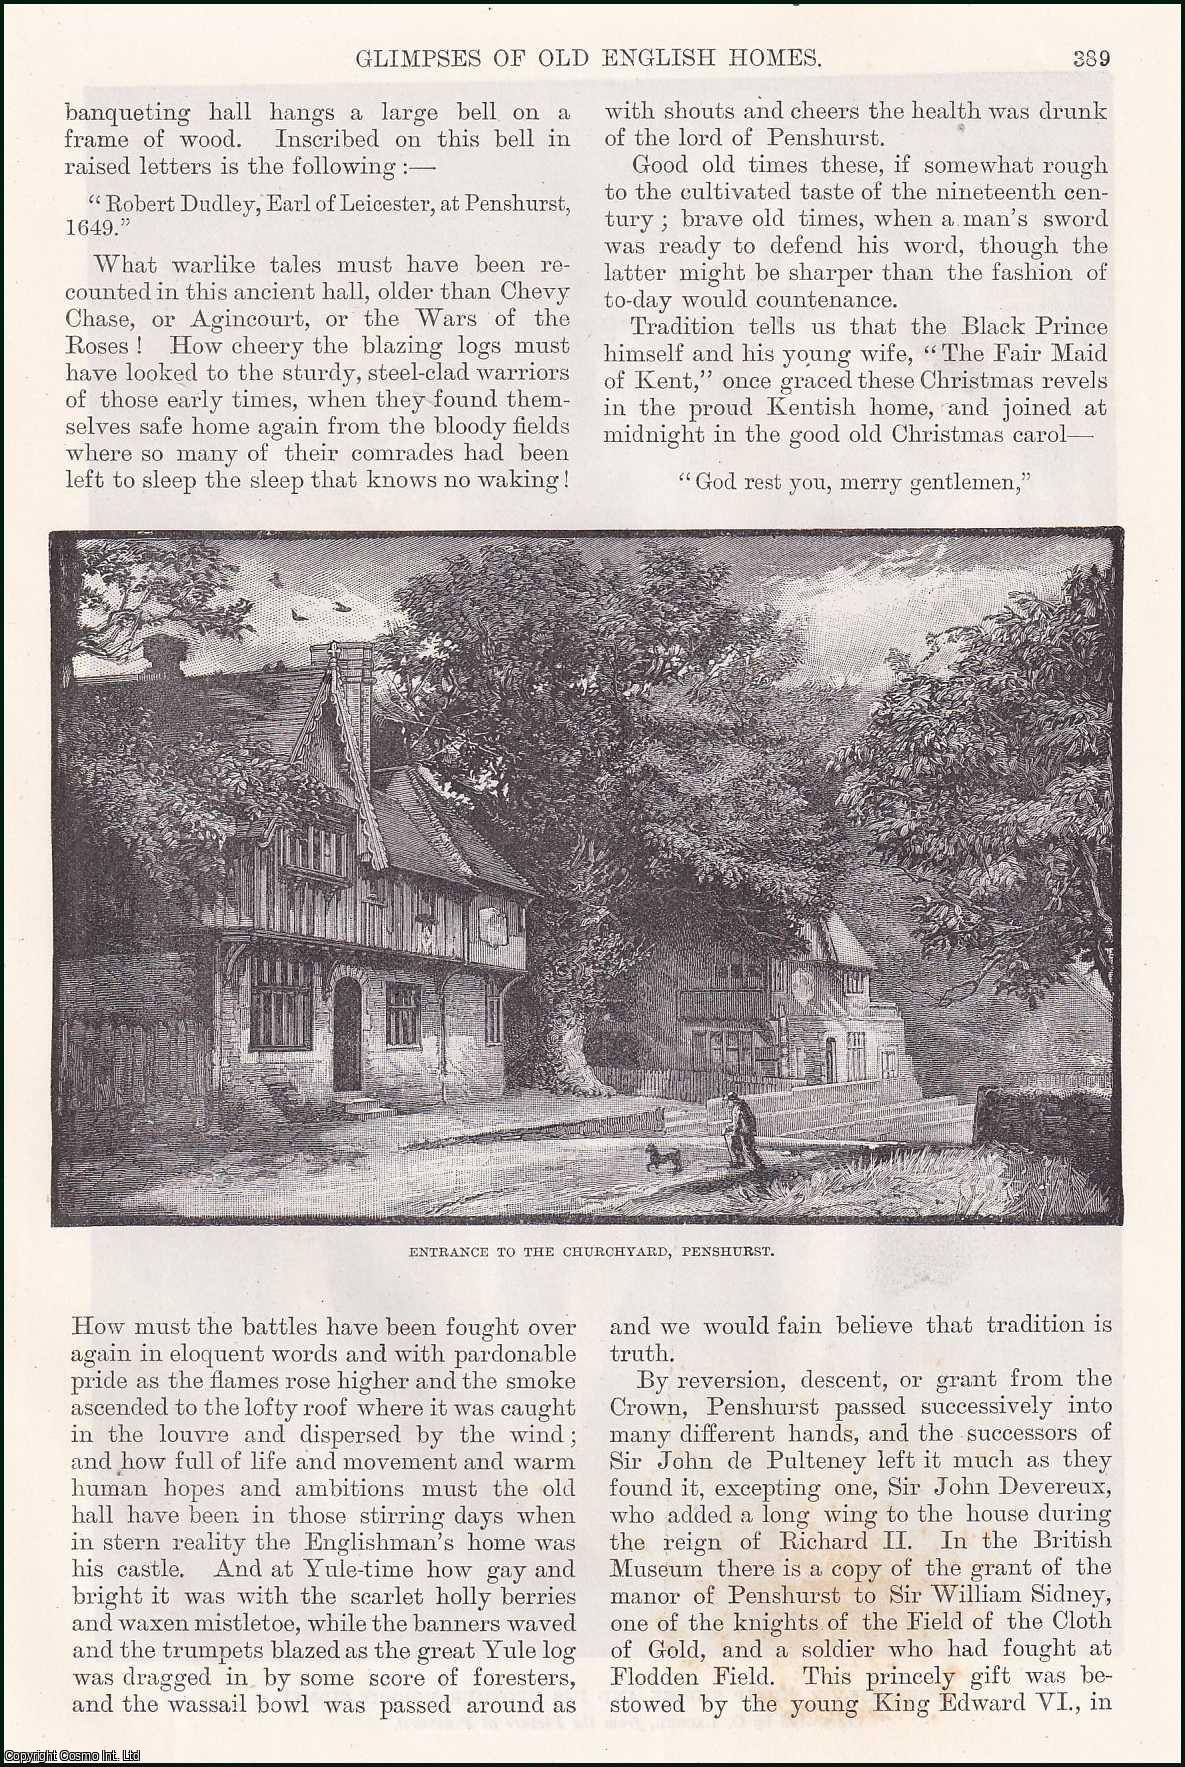 Elizabeth Balch - Penshurst, Kent; Glimpses of Old English Homes. An original article from the English Illustrated Magazine, 1888.